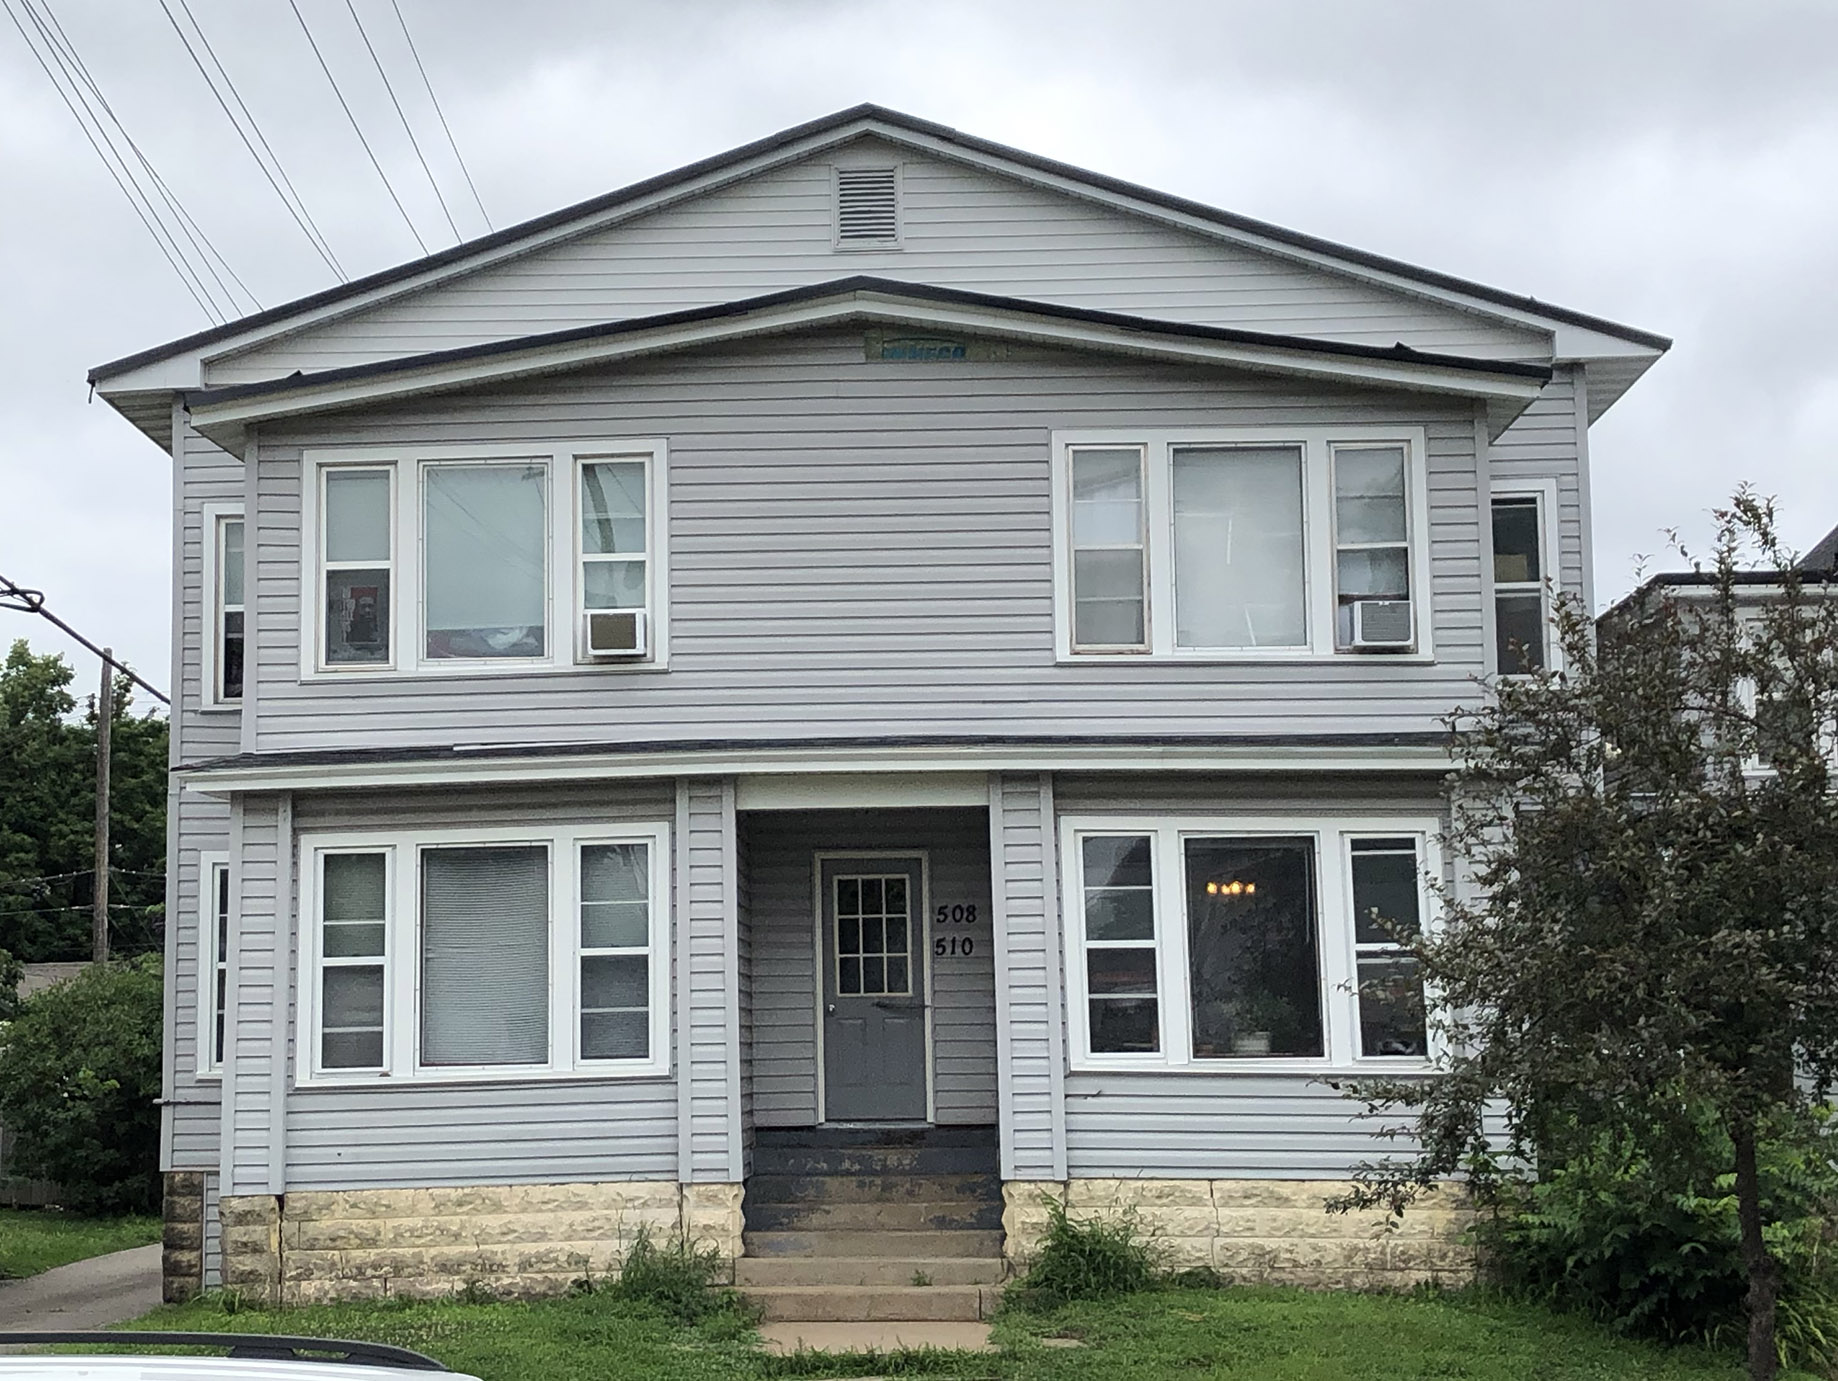 508 West Grand Ave, Eau Claire, Wisconsin 54703, 1 Bedroom Bedrooms, ,1 BathroomBathrooms,Multi-Family,Apartment,508 West Grand Ave,1125